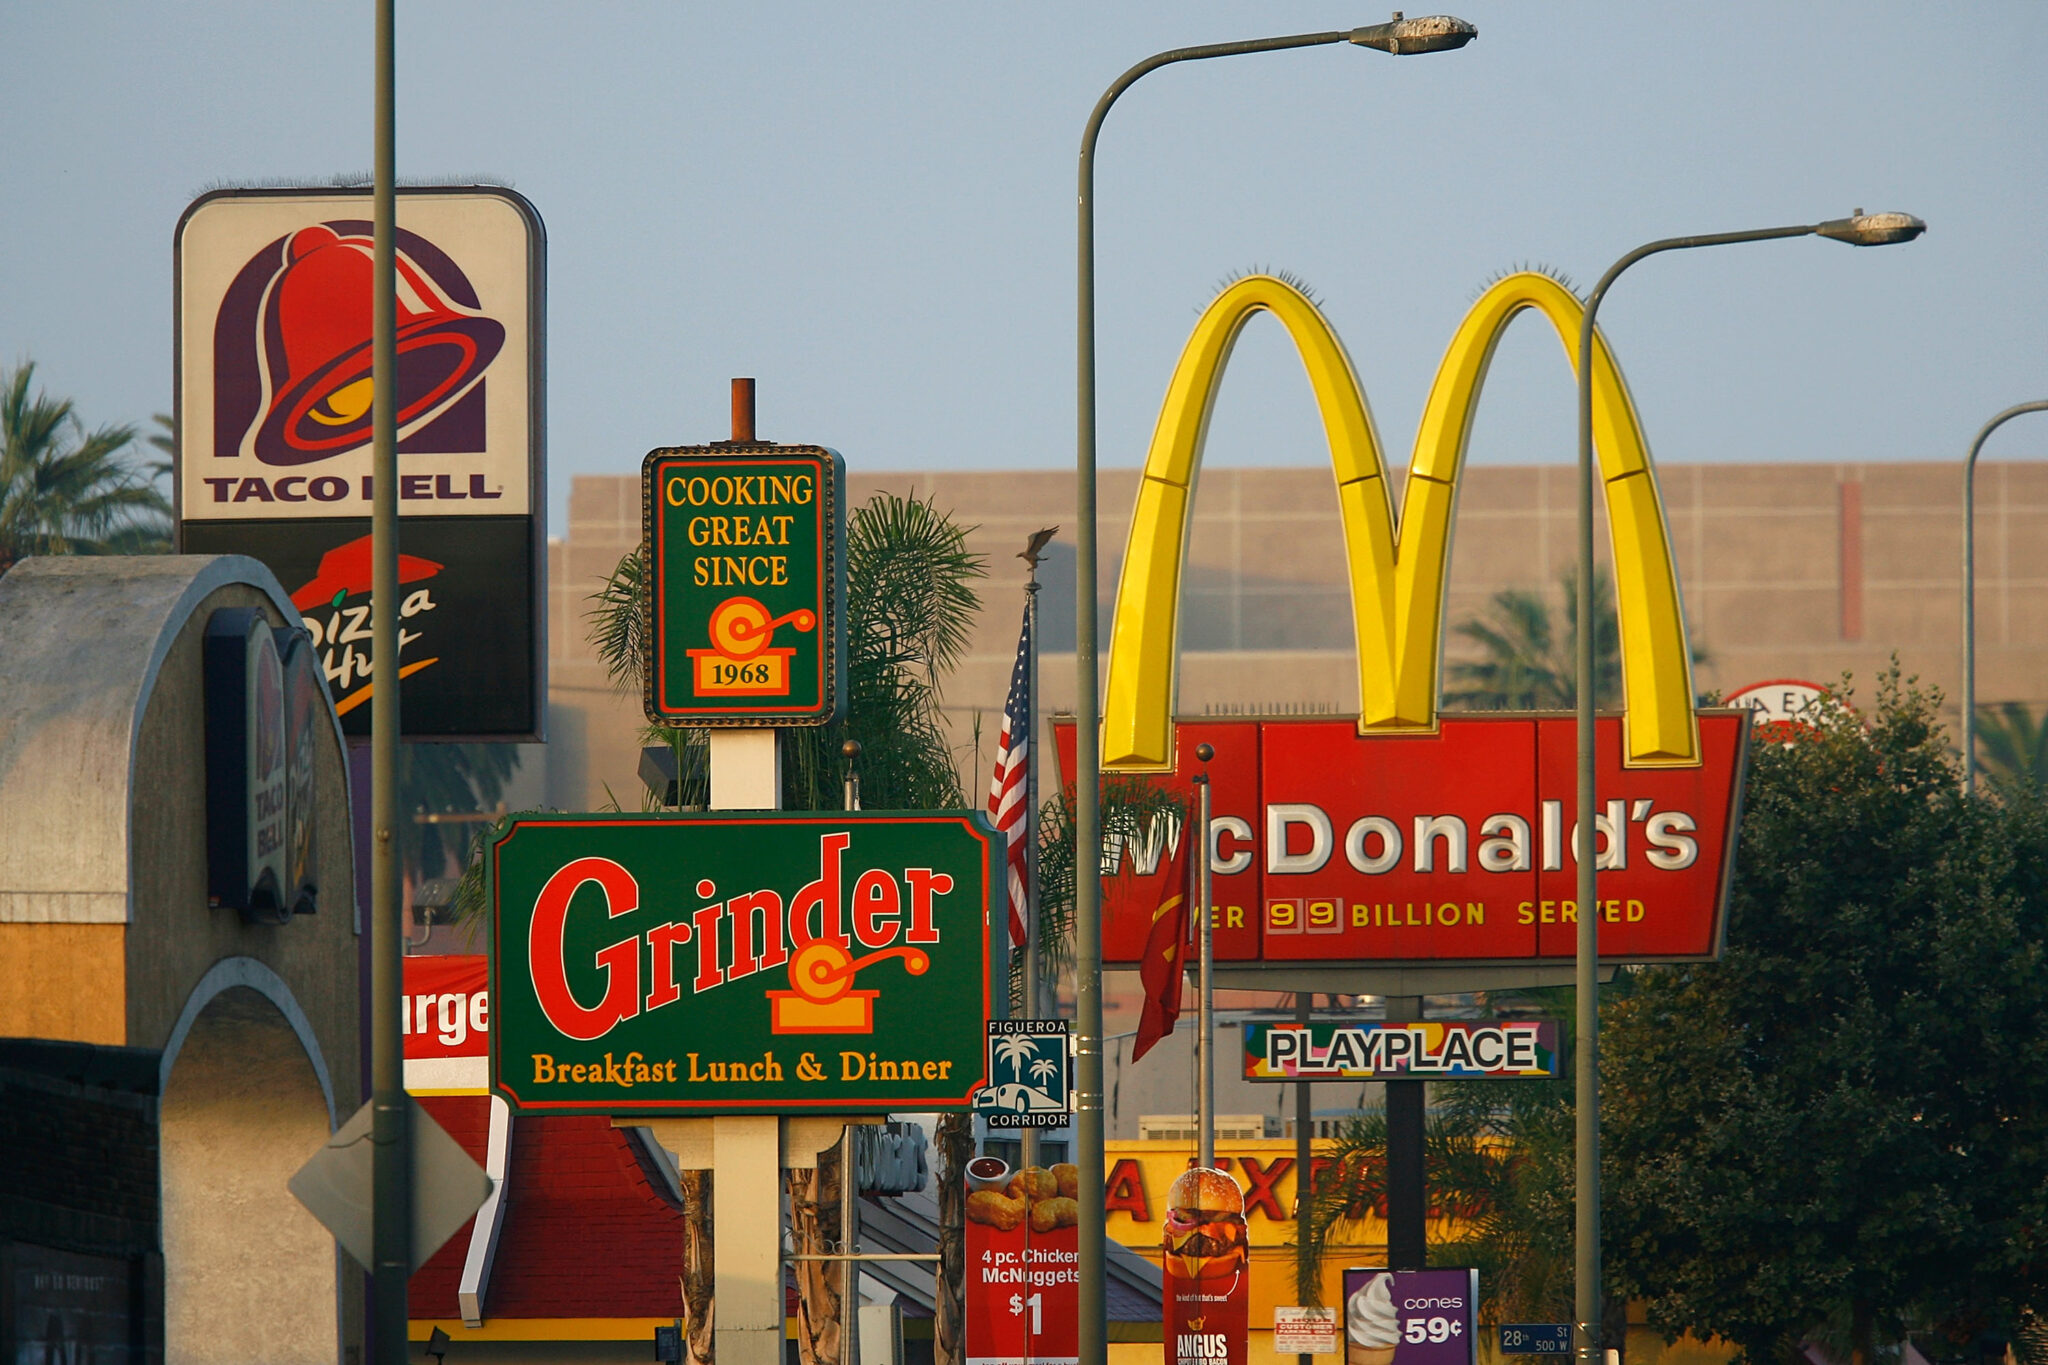 LOS ANGELES, CA - JULY 24:  Signs for Taco Bell, Grinder, McDonalds, Panda Express fast-food restaurant line the streets in the Figueroa Corridor area of South Los Angeles on July 24, 2008, Los Angeles, California. The Los Angeles City Council committee has unanimously approved year-long moratorium on new fast-food restaurants in a 32-square-mile area, mostly in South Los Angeles, pending approval by the full council and the signature of Mayor Antonio Villaraigosa to make it the law. South LA has the highest concentration of fast-food restaurants of the city, about 400, and only a few grocery stores. L.A. Councilwoman Jan Perry proposed the measure to try to reduce health problems associated with a diet high in fast-food, like obesity and diabetes, which plague many of the half-million people living there.  (Photo by David McNew/Getty Images)